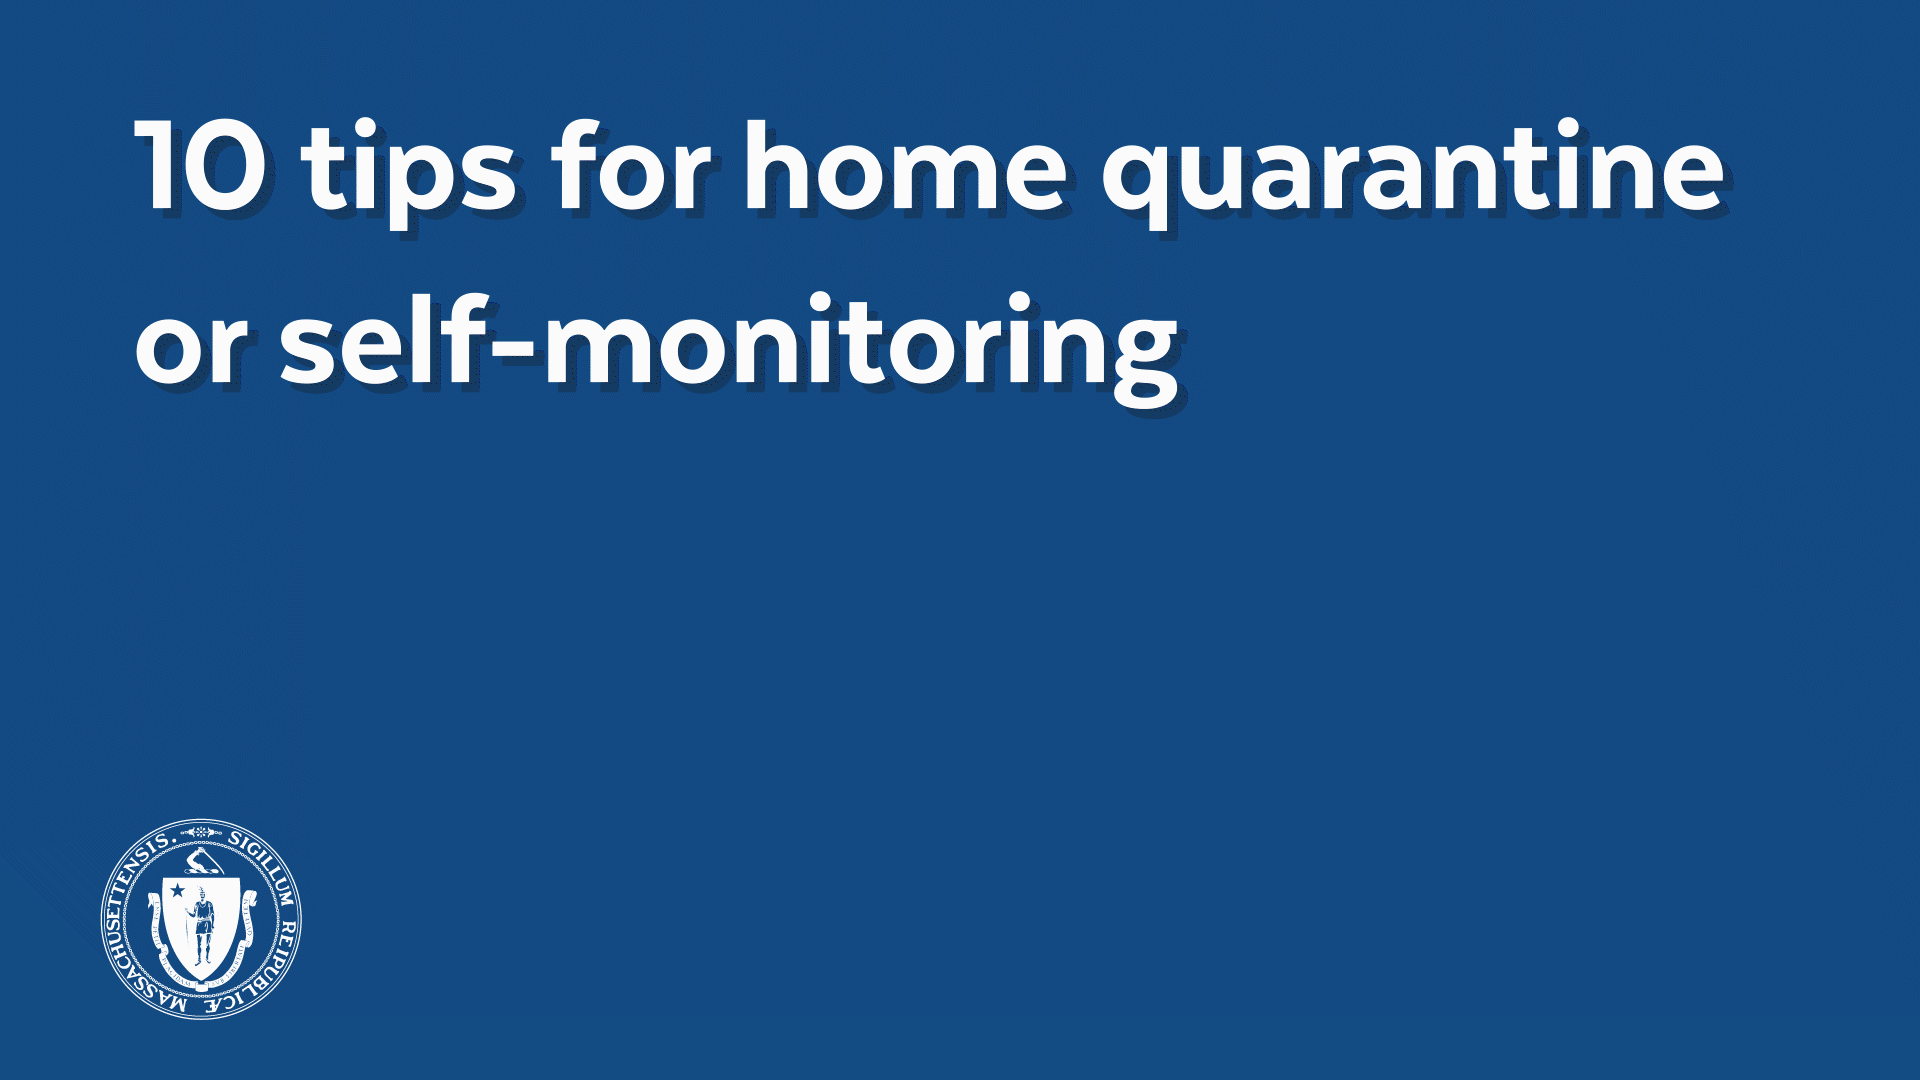 10 Tips for home quarantine or self-monitoring